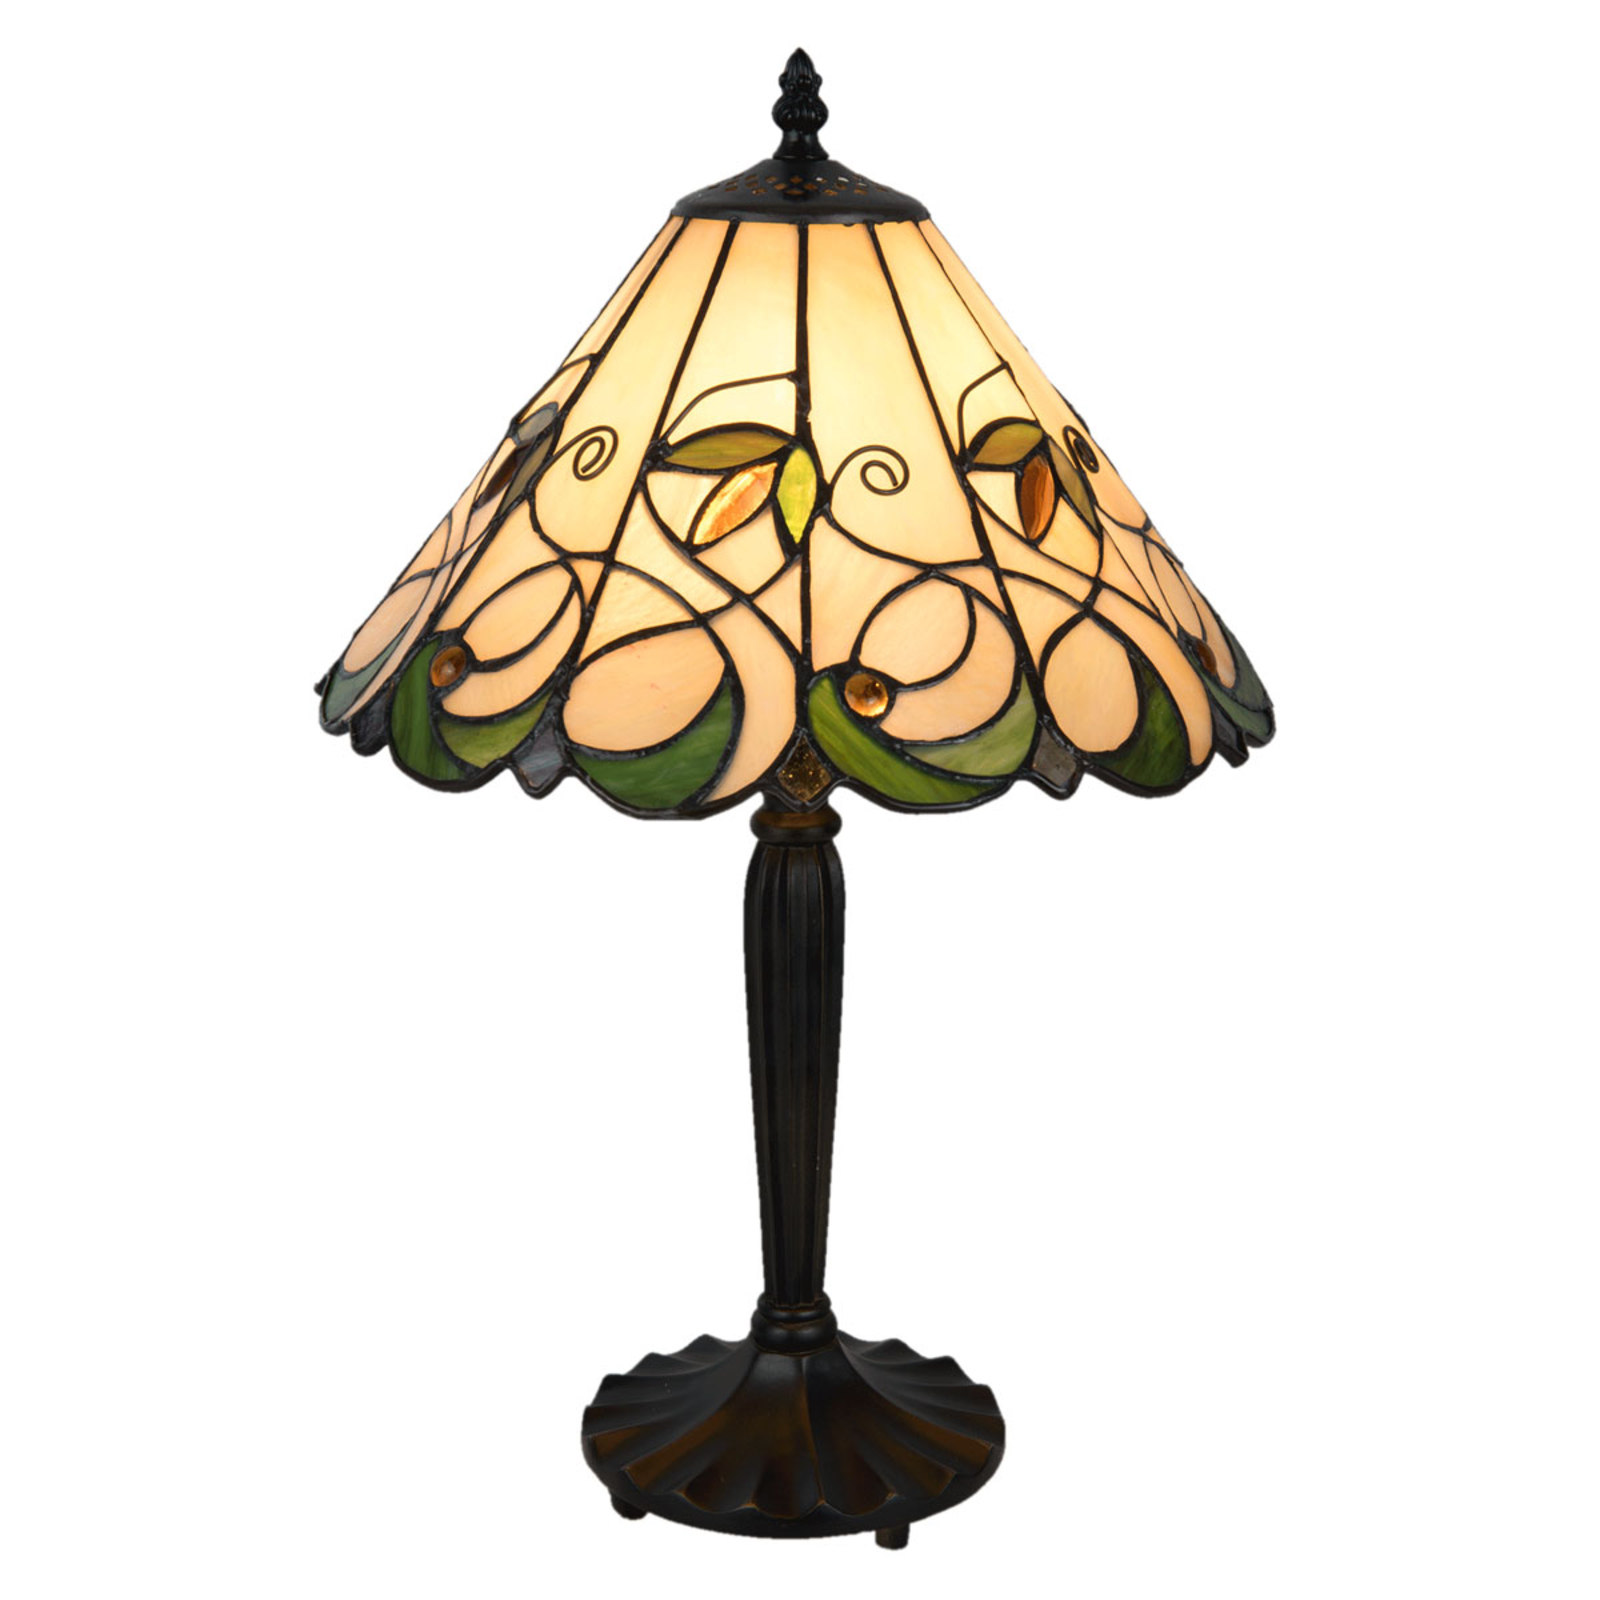 5207 table lamp, Tiffany style, cream and green